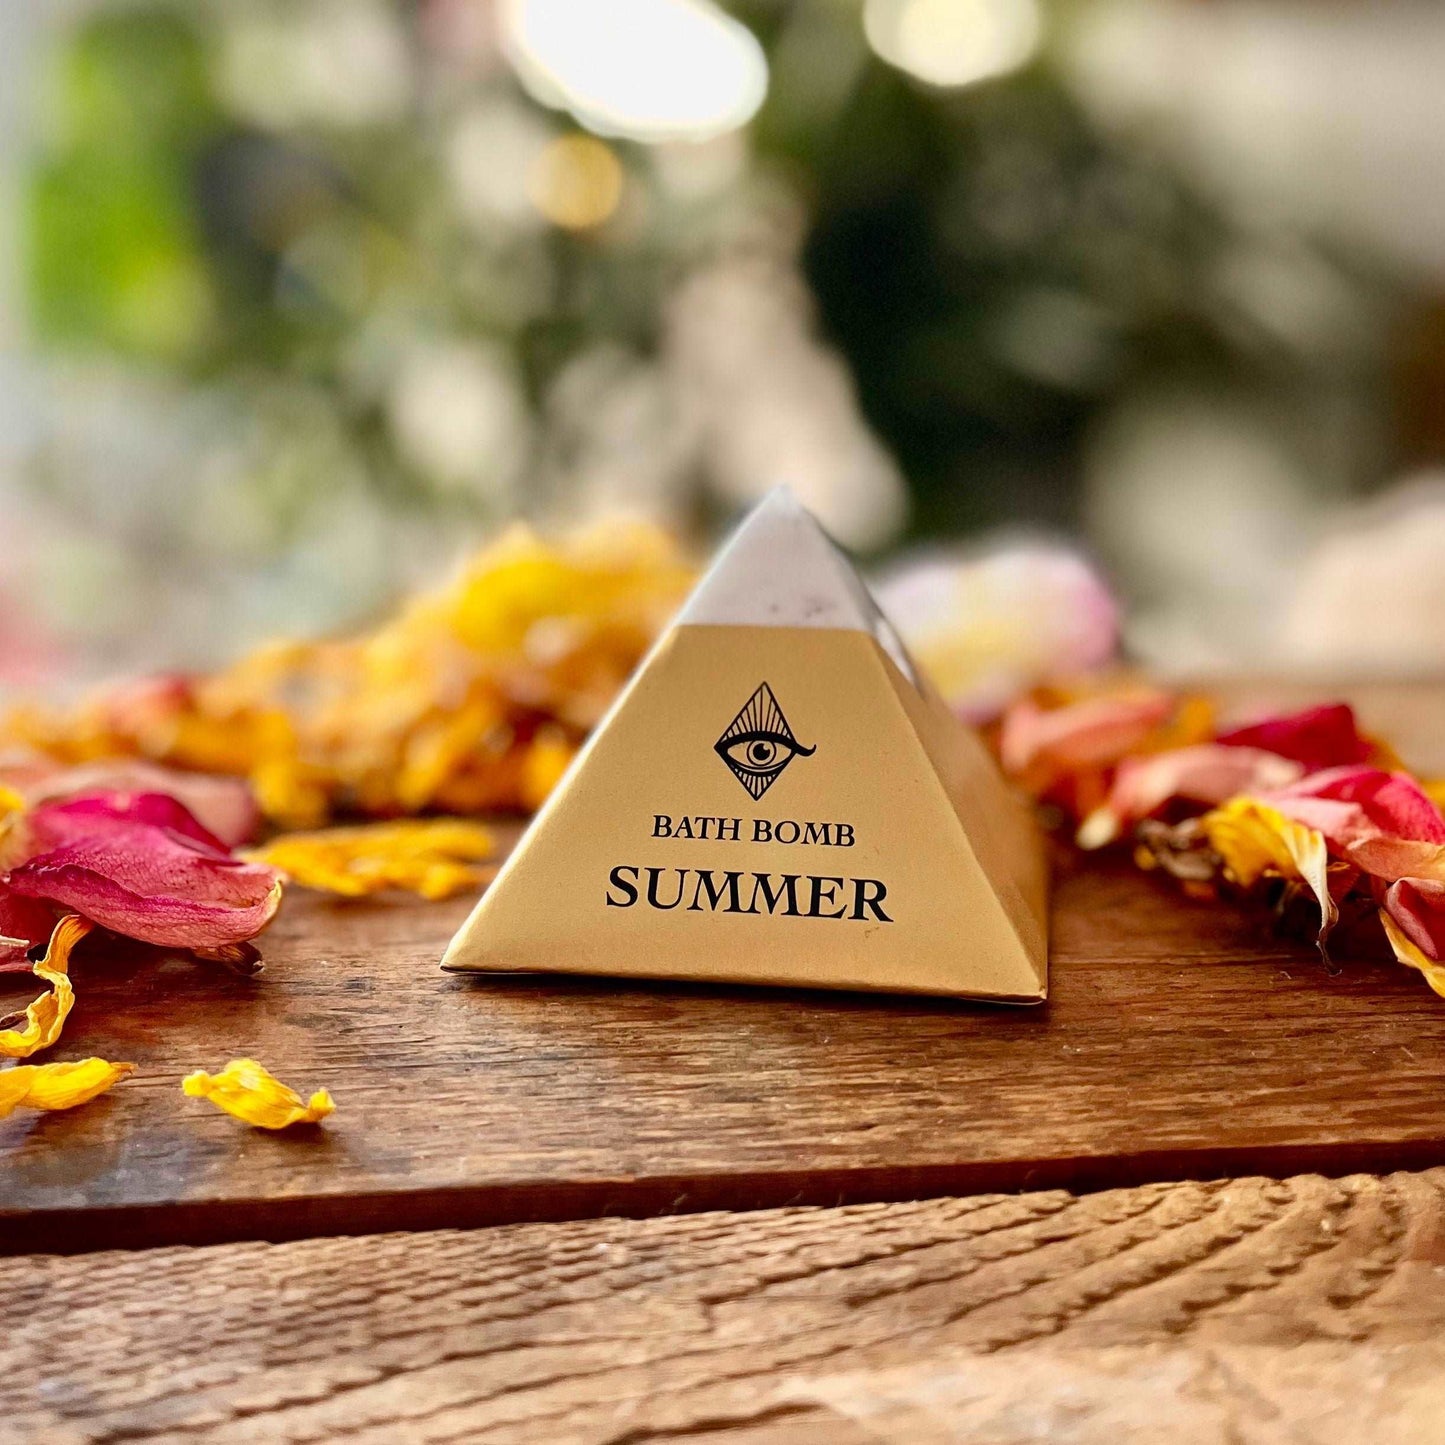 Immerse yourself in the warmth of summer with our Litha | Summer Solstice Bath Bomb. Crafted with the harmonious blend of Basil, Petitgrain, and Vetiver organic essential oils, this bath bomb invites you to embrace the vibrant energy of the sun's peak. Indulge in the grounding and uplifting scents that evoke the essence of summer solstice. Let the enchanting fragrance inspire feelings of balance and connection to nature as you bask in the radiant glow of Litha.